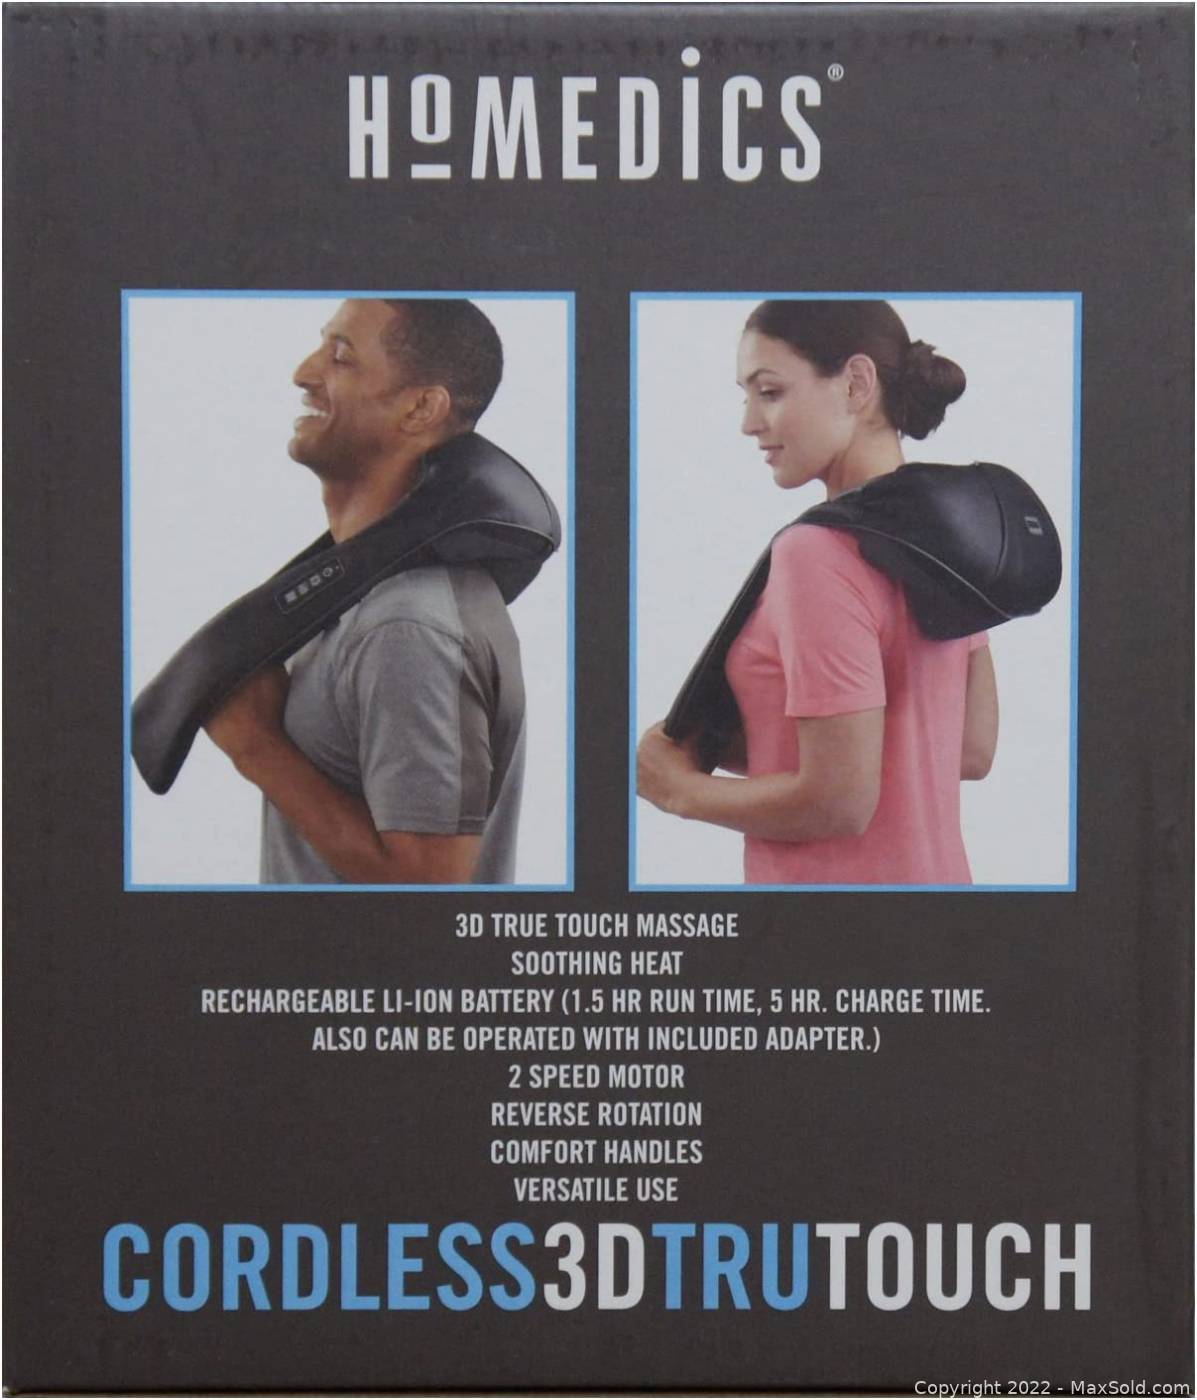 https://d12srav5gxm0re.cloudfront.net/auctionimages/78844/1668788401/whomedics-nms-630h-cordless-3d-trutouch-neck-and-shoulder-massager-with-heat-muscle-pain-relief--138-7.jpg